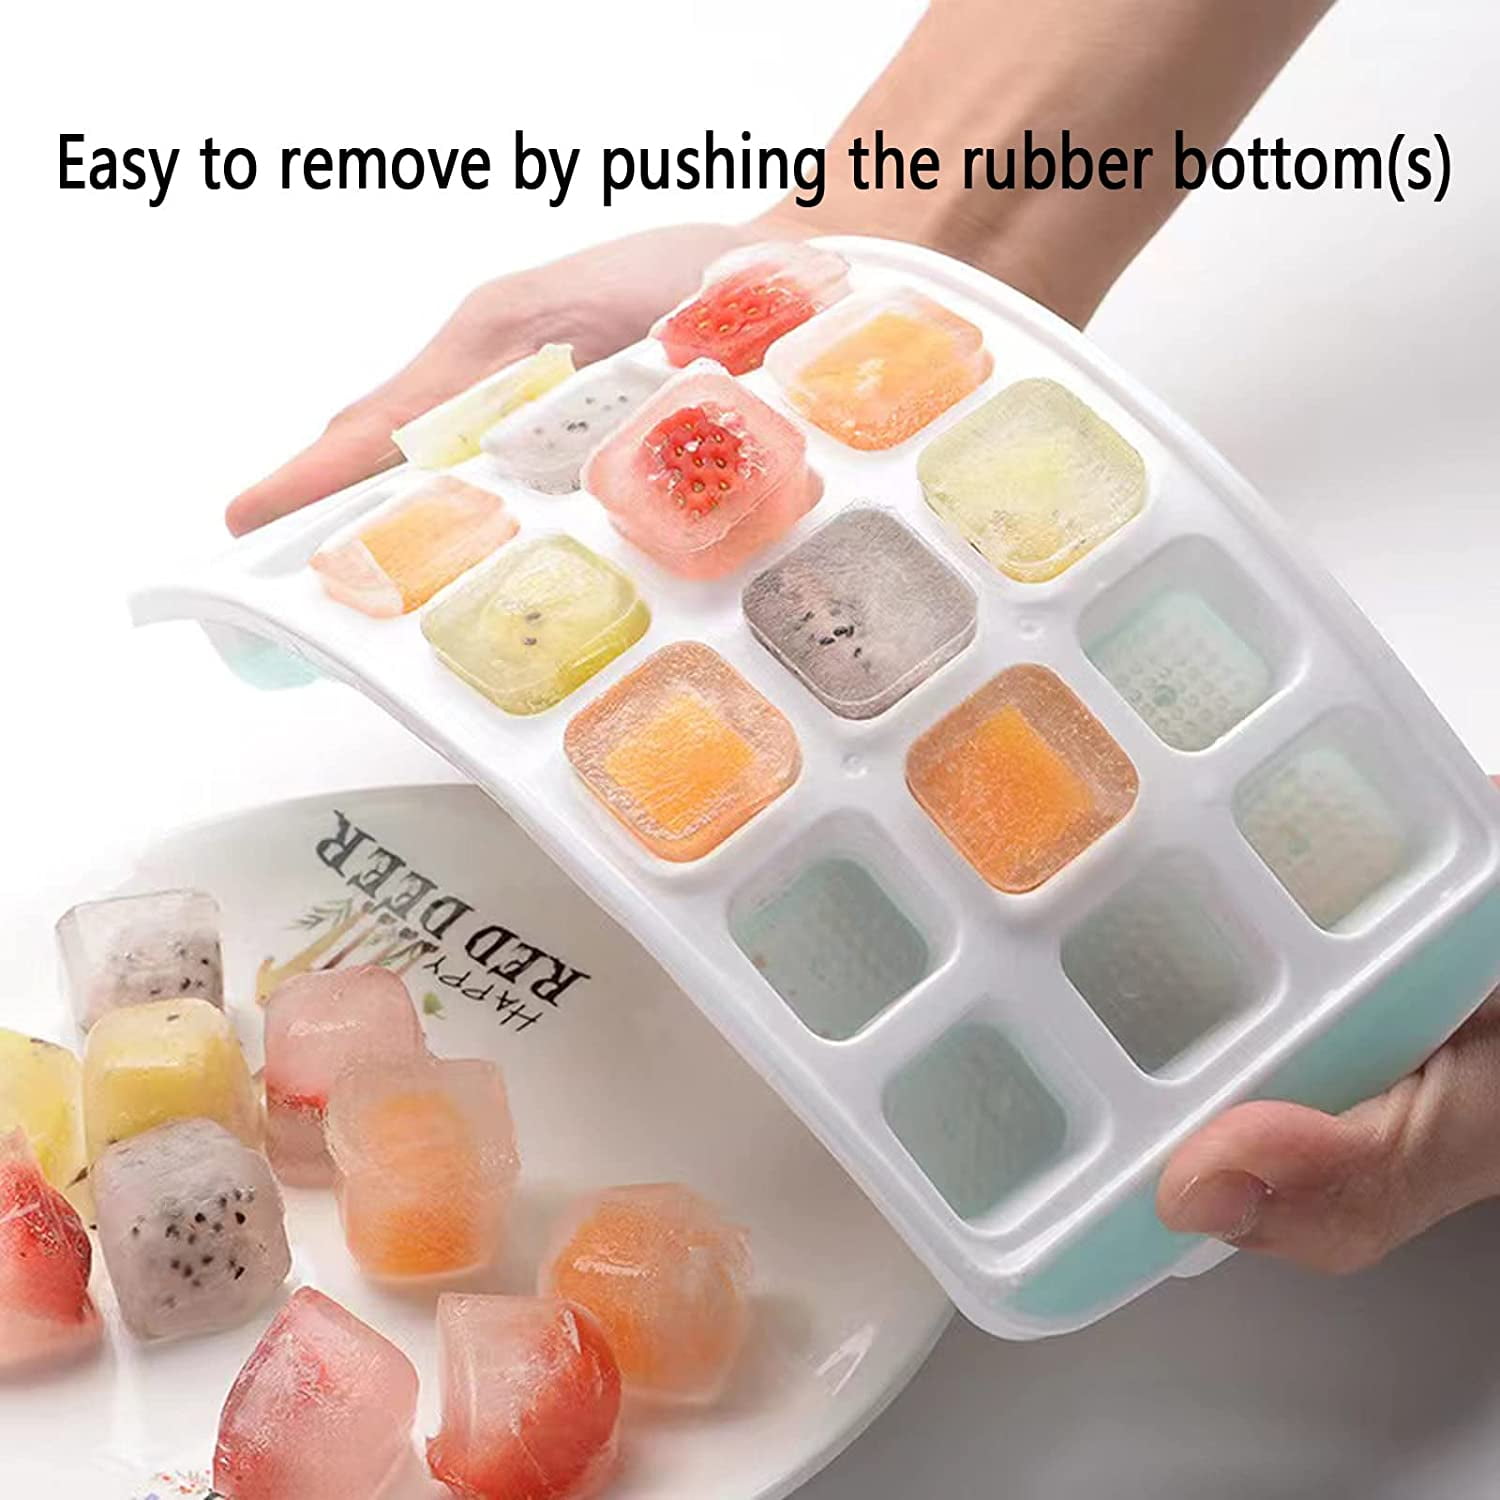 Mini Ice Cube Trays for Freezer with Bin and Scoop, 4 Pack 640 Small Nugget  Ice Cube Tray Silicone BPA Free, Tiny Crushed Ice cubes Maker Molds for